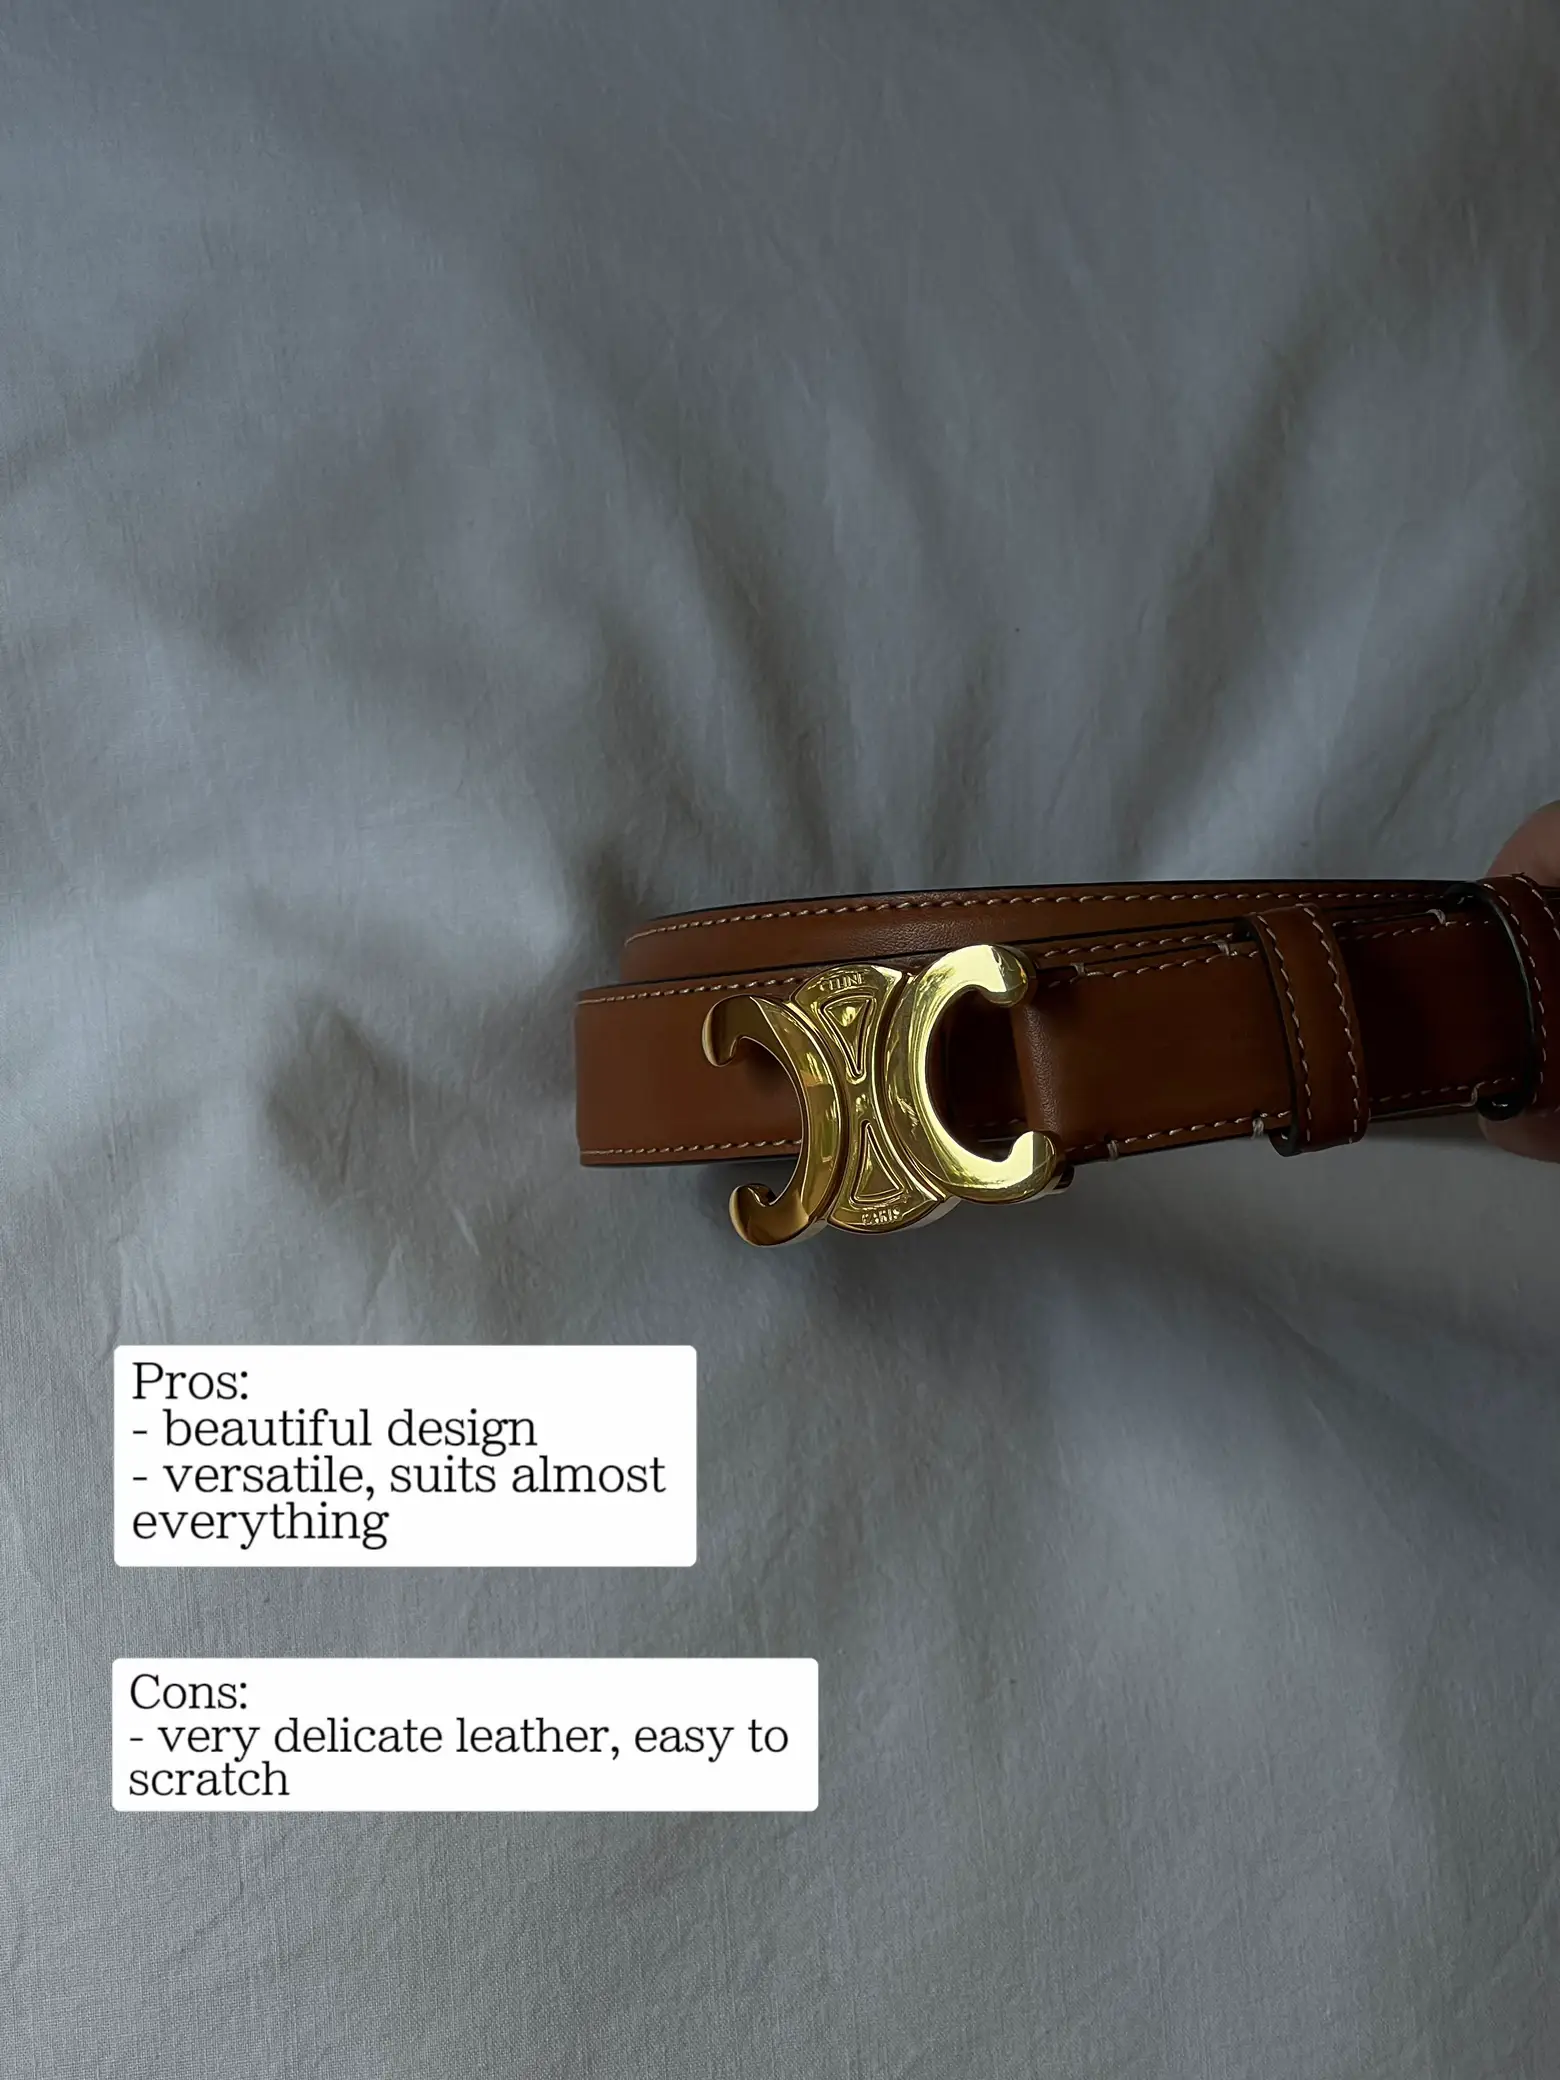 Celine Belt Review, Gallery posted by Ami 🧚‍♀️💕